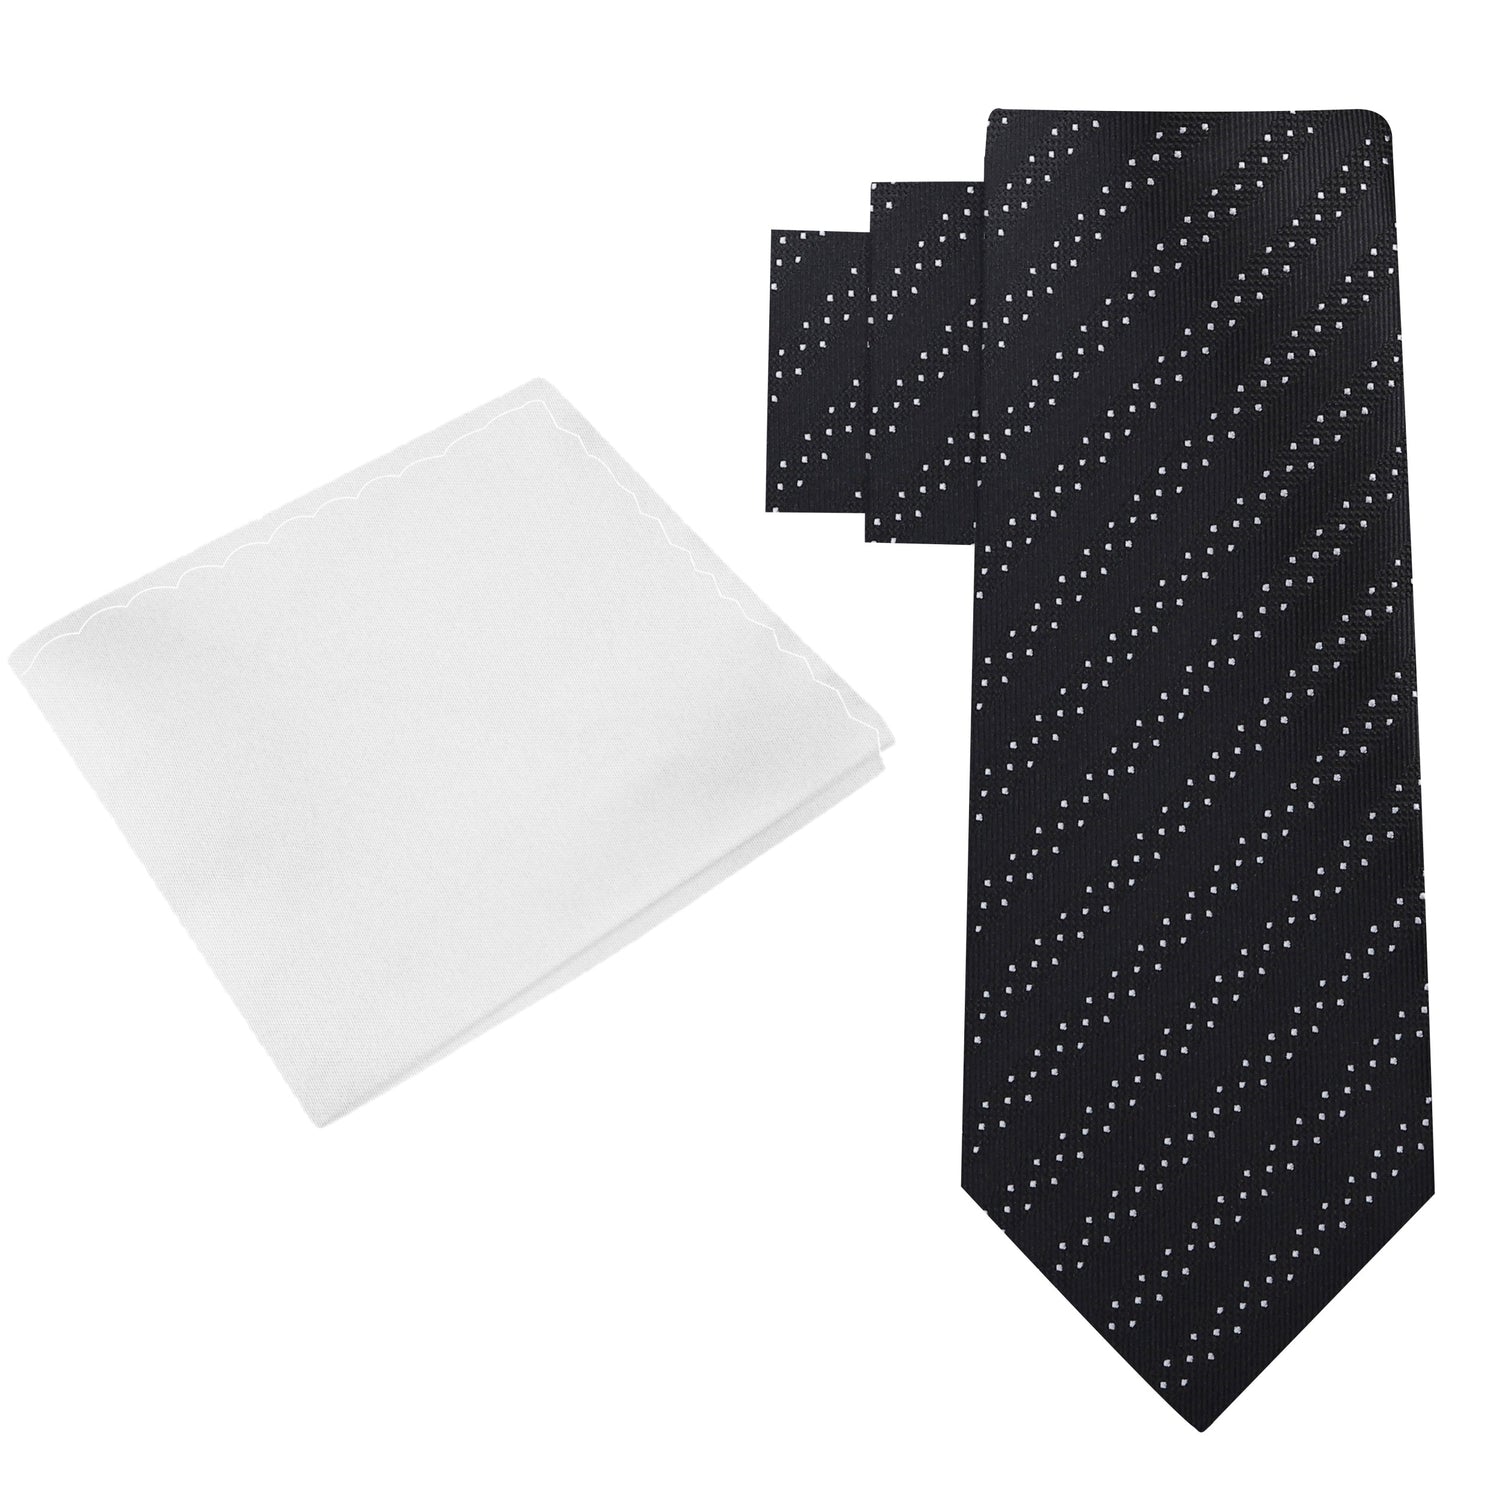 Alt View: Black with White Dot Necktie and White Square